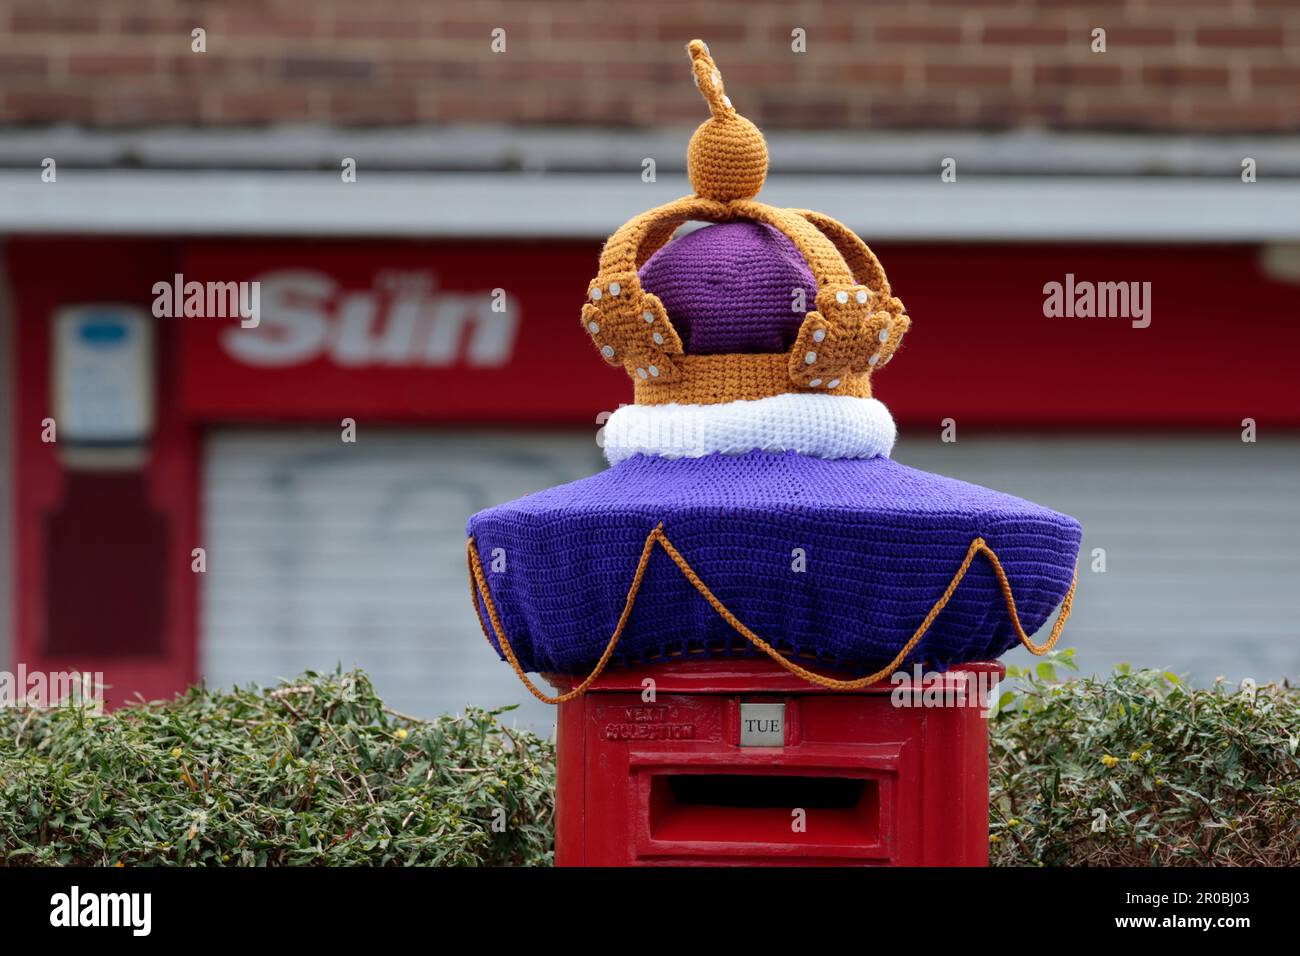 King charles111 coronation celebrations may 2003 Horsham w.sussex uk gold crown knitted decoration on red post box purple white and yellowish gold Stock Photo